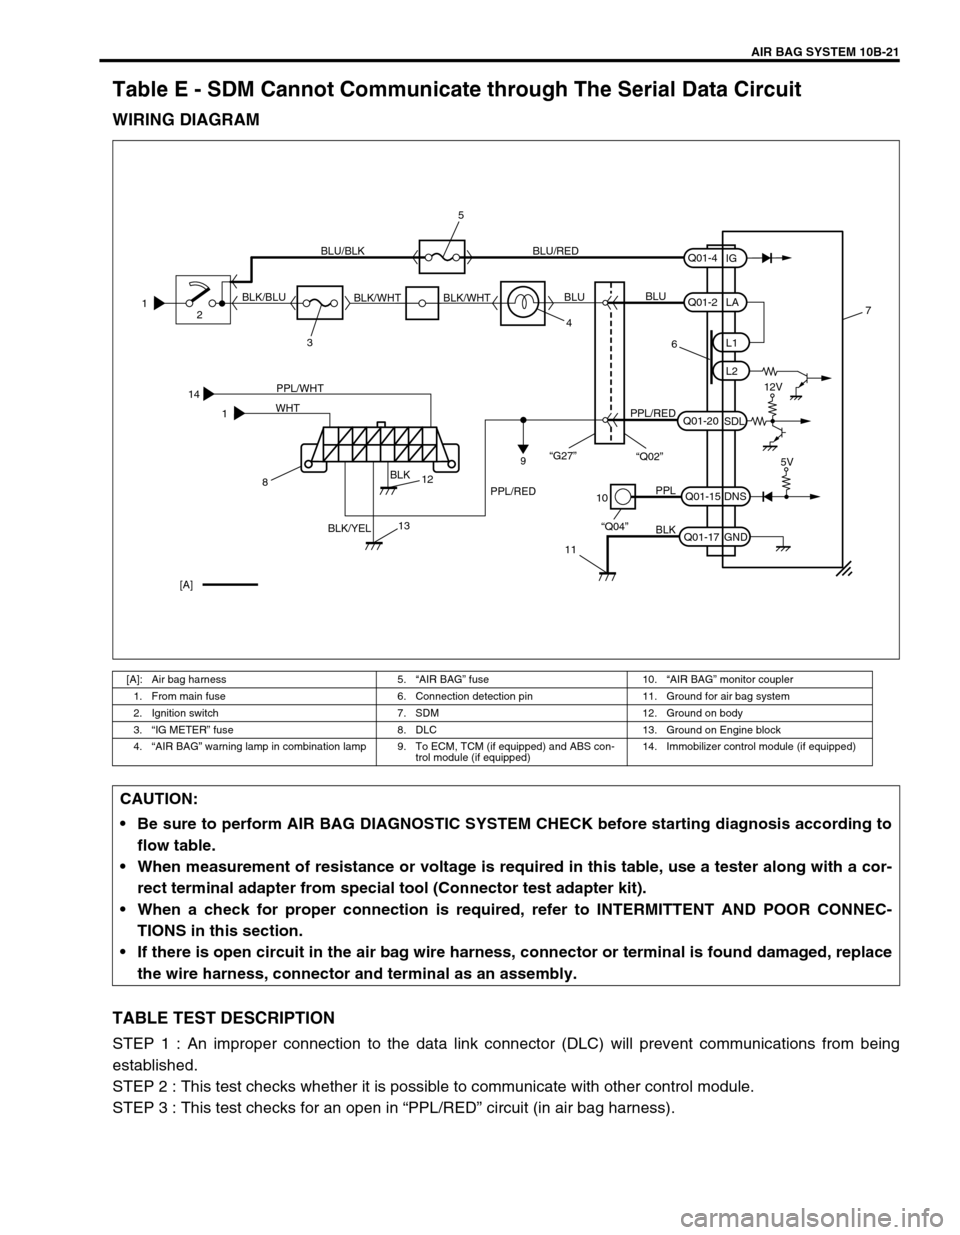 SUZUKI GRAND VITARA 1999 2.G Workshop Manual AIR BAG SYSTEM 10B-21
Table E - SDM Cannot Communicate through The Serial Data Circuit
WIRING DIAGRAM
TABLE TEST DESCRIPTION
STEP 1 : An improper connection to the data link connector (DLC) will preve